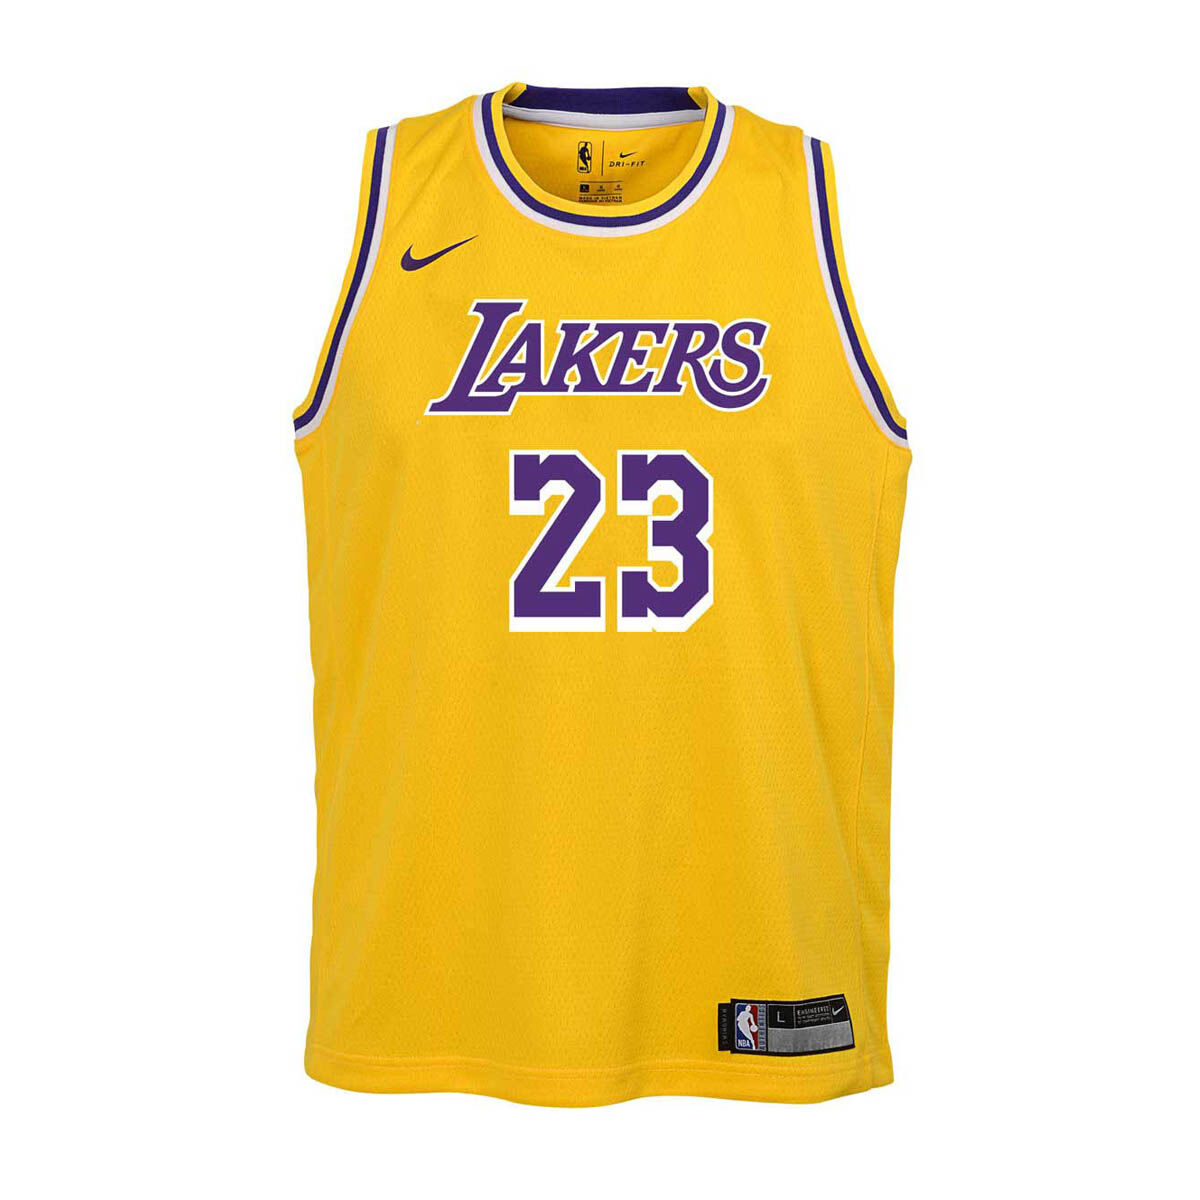 lakers jersey for boys Shop Clothing & Shoes Online